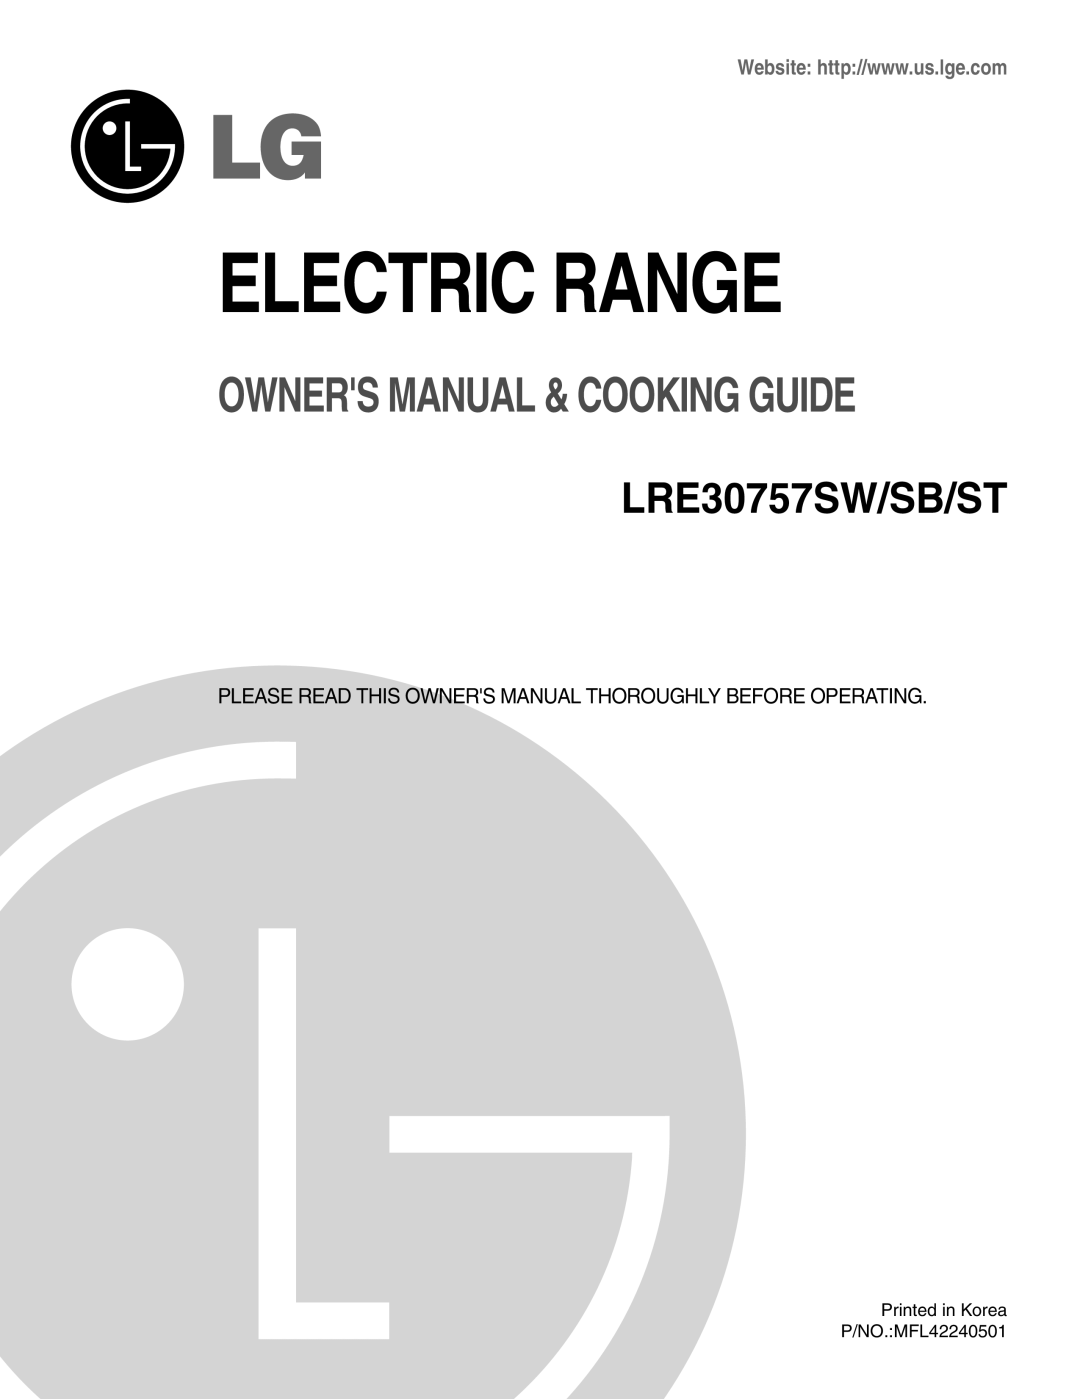 LG Electronics LRE30757ST owner manual Printed in Korea P/NO.:MFL42240501, Electric Range, Owners Manual & Cooking Guide 